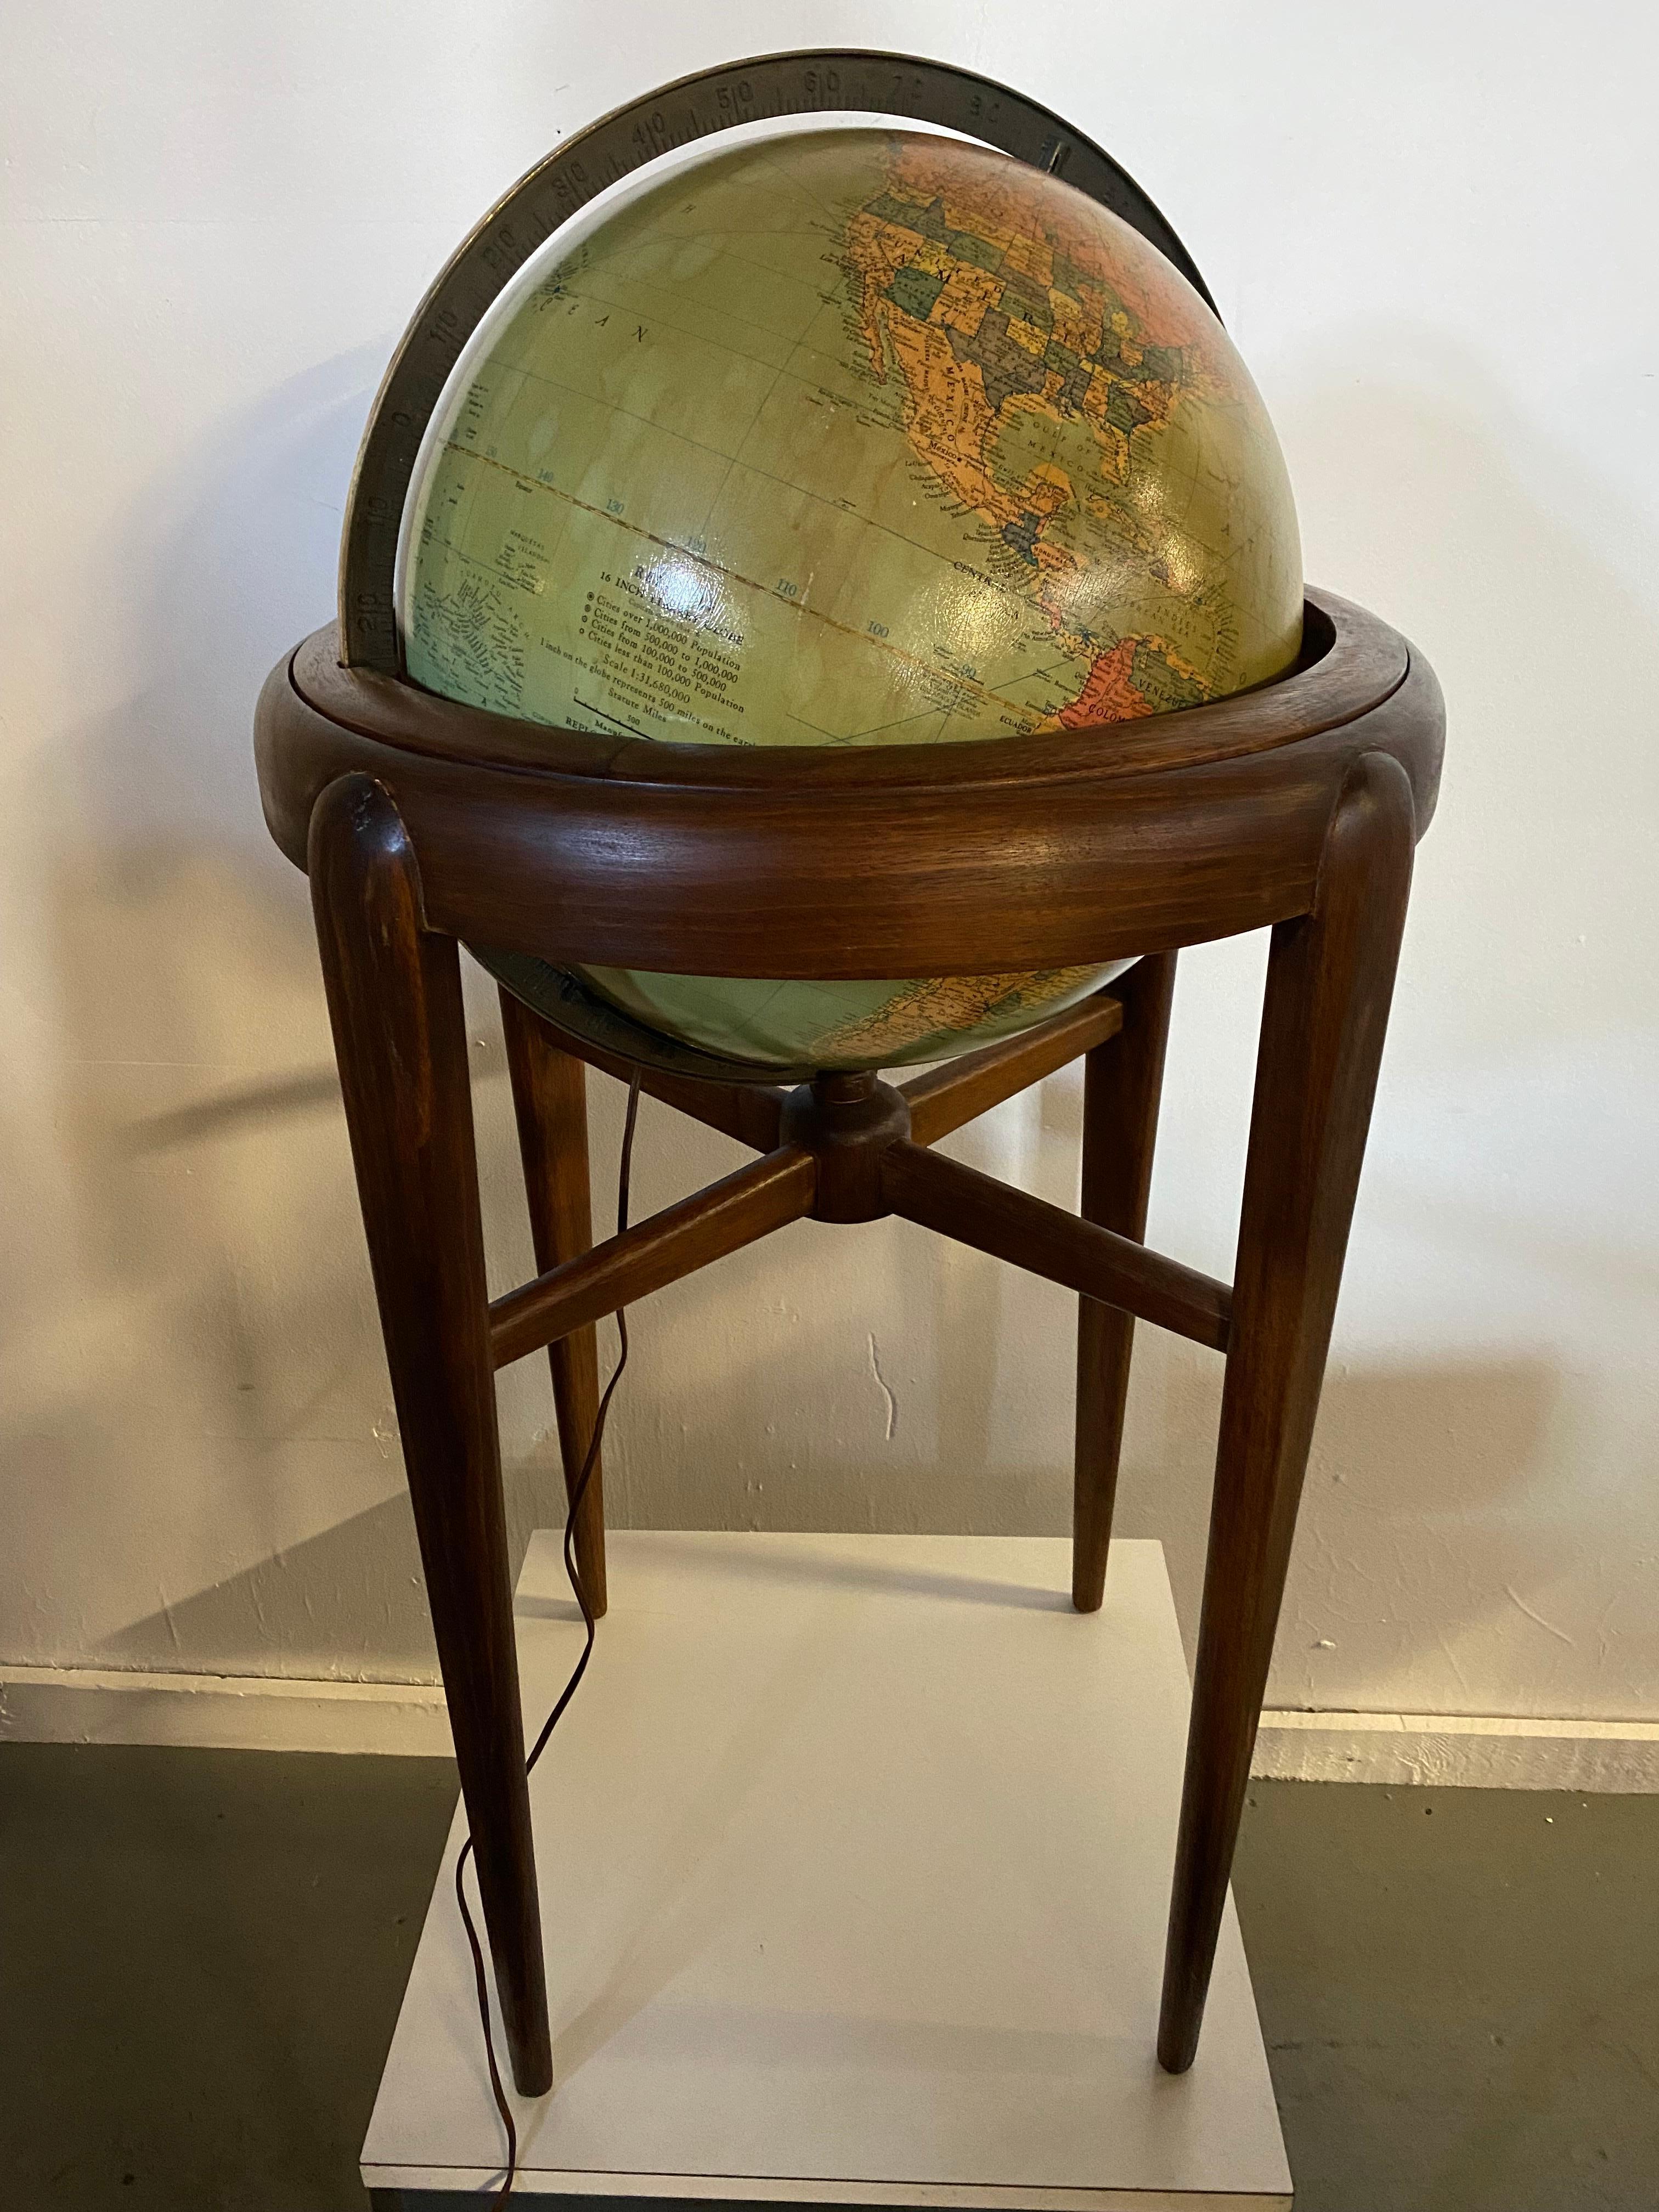 American Art Deco (Pre-WWII) globe of the world with an internal light resting in walnut wood stand (made by Replogle Globes, INC, Chicago, IL). Glass globe. Beautiful design. Tested and electrical working perfectly.